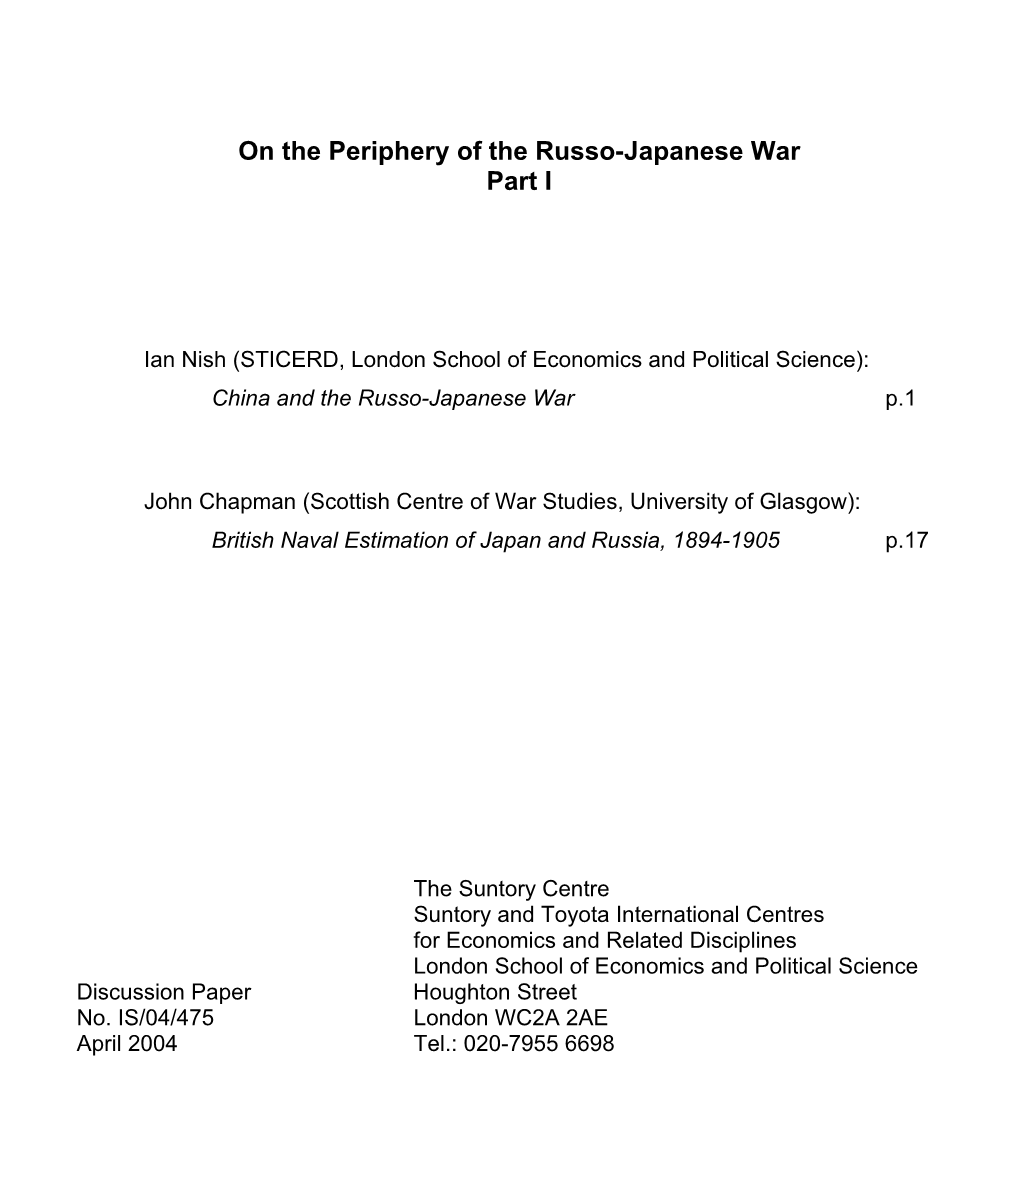 On the Periphery of the Russo-Japanese War Part I